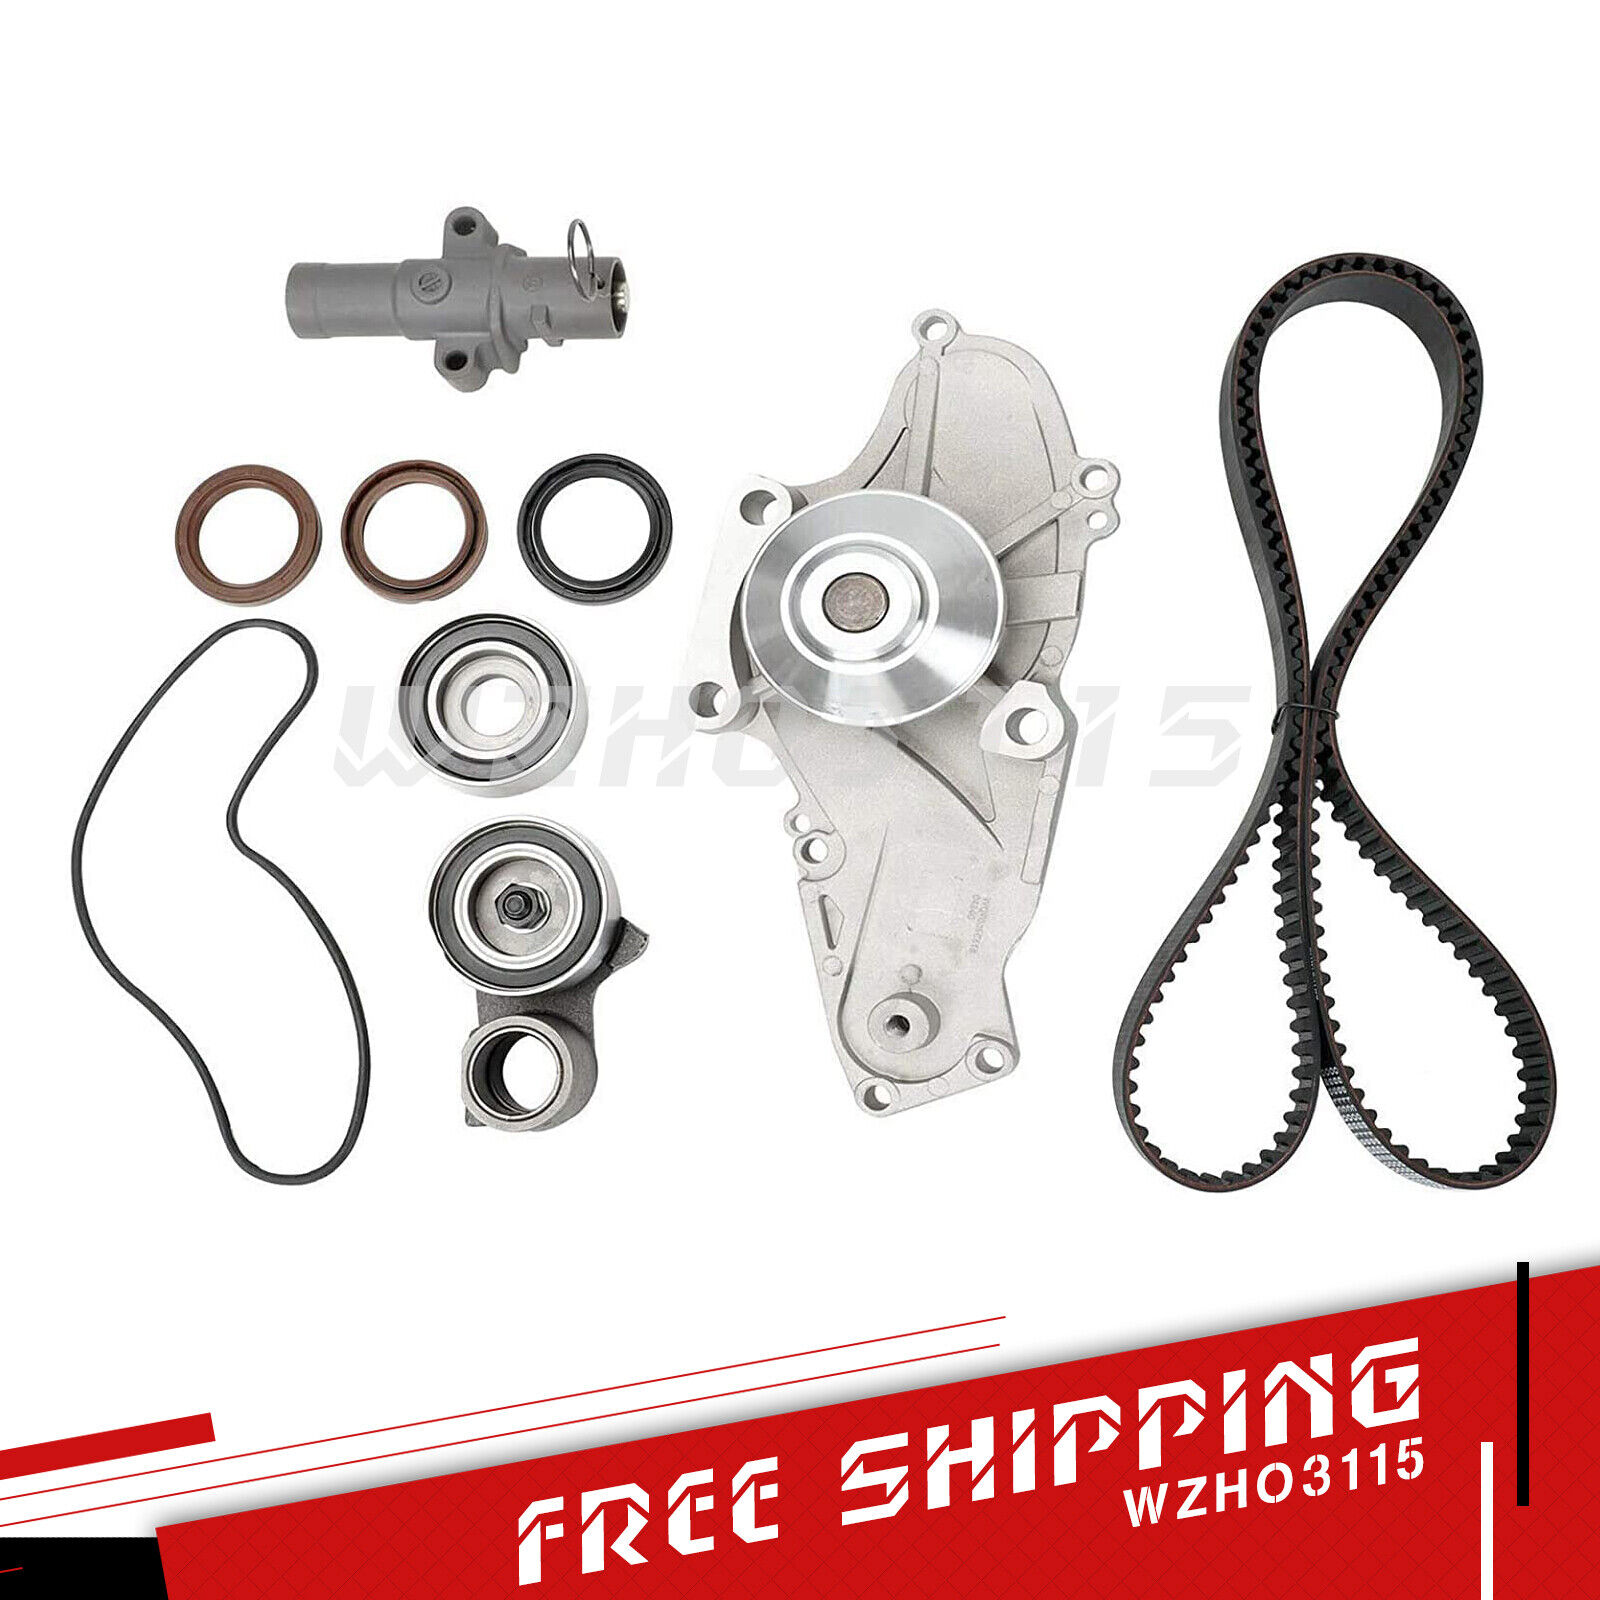 New Timing Belt Kit with Water Pump For HONDA/ACURA/ACCORD/ODYSSEY